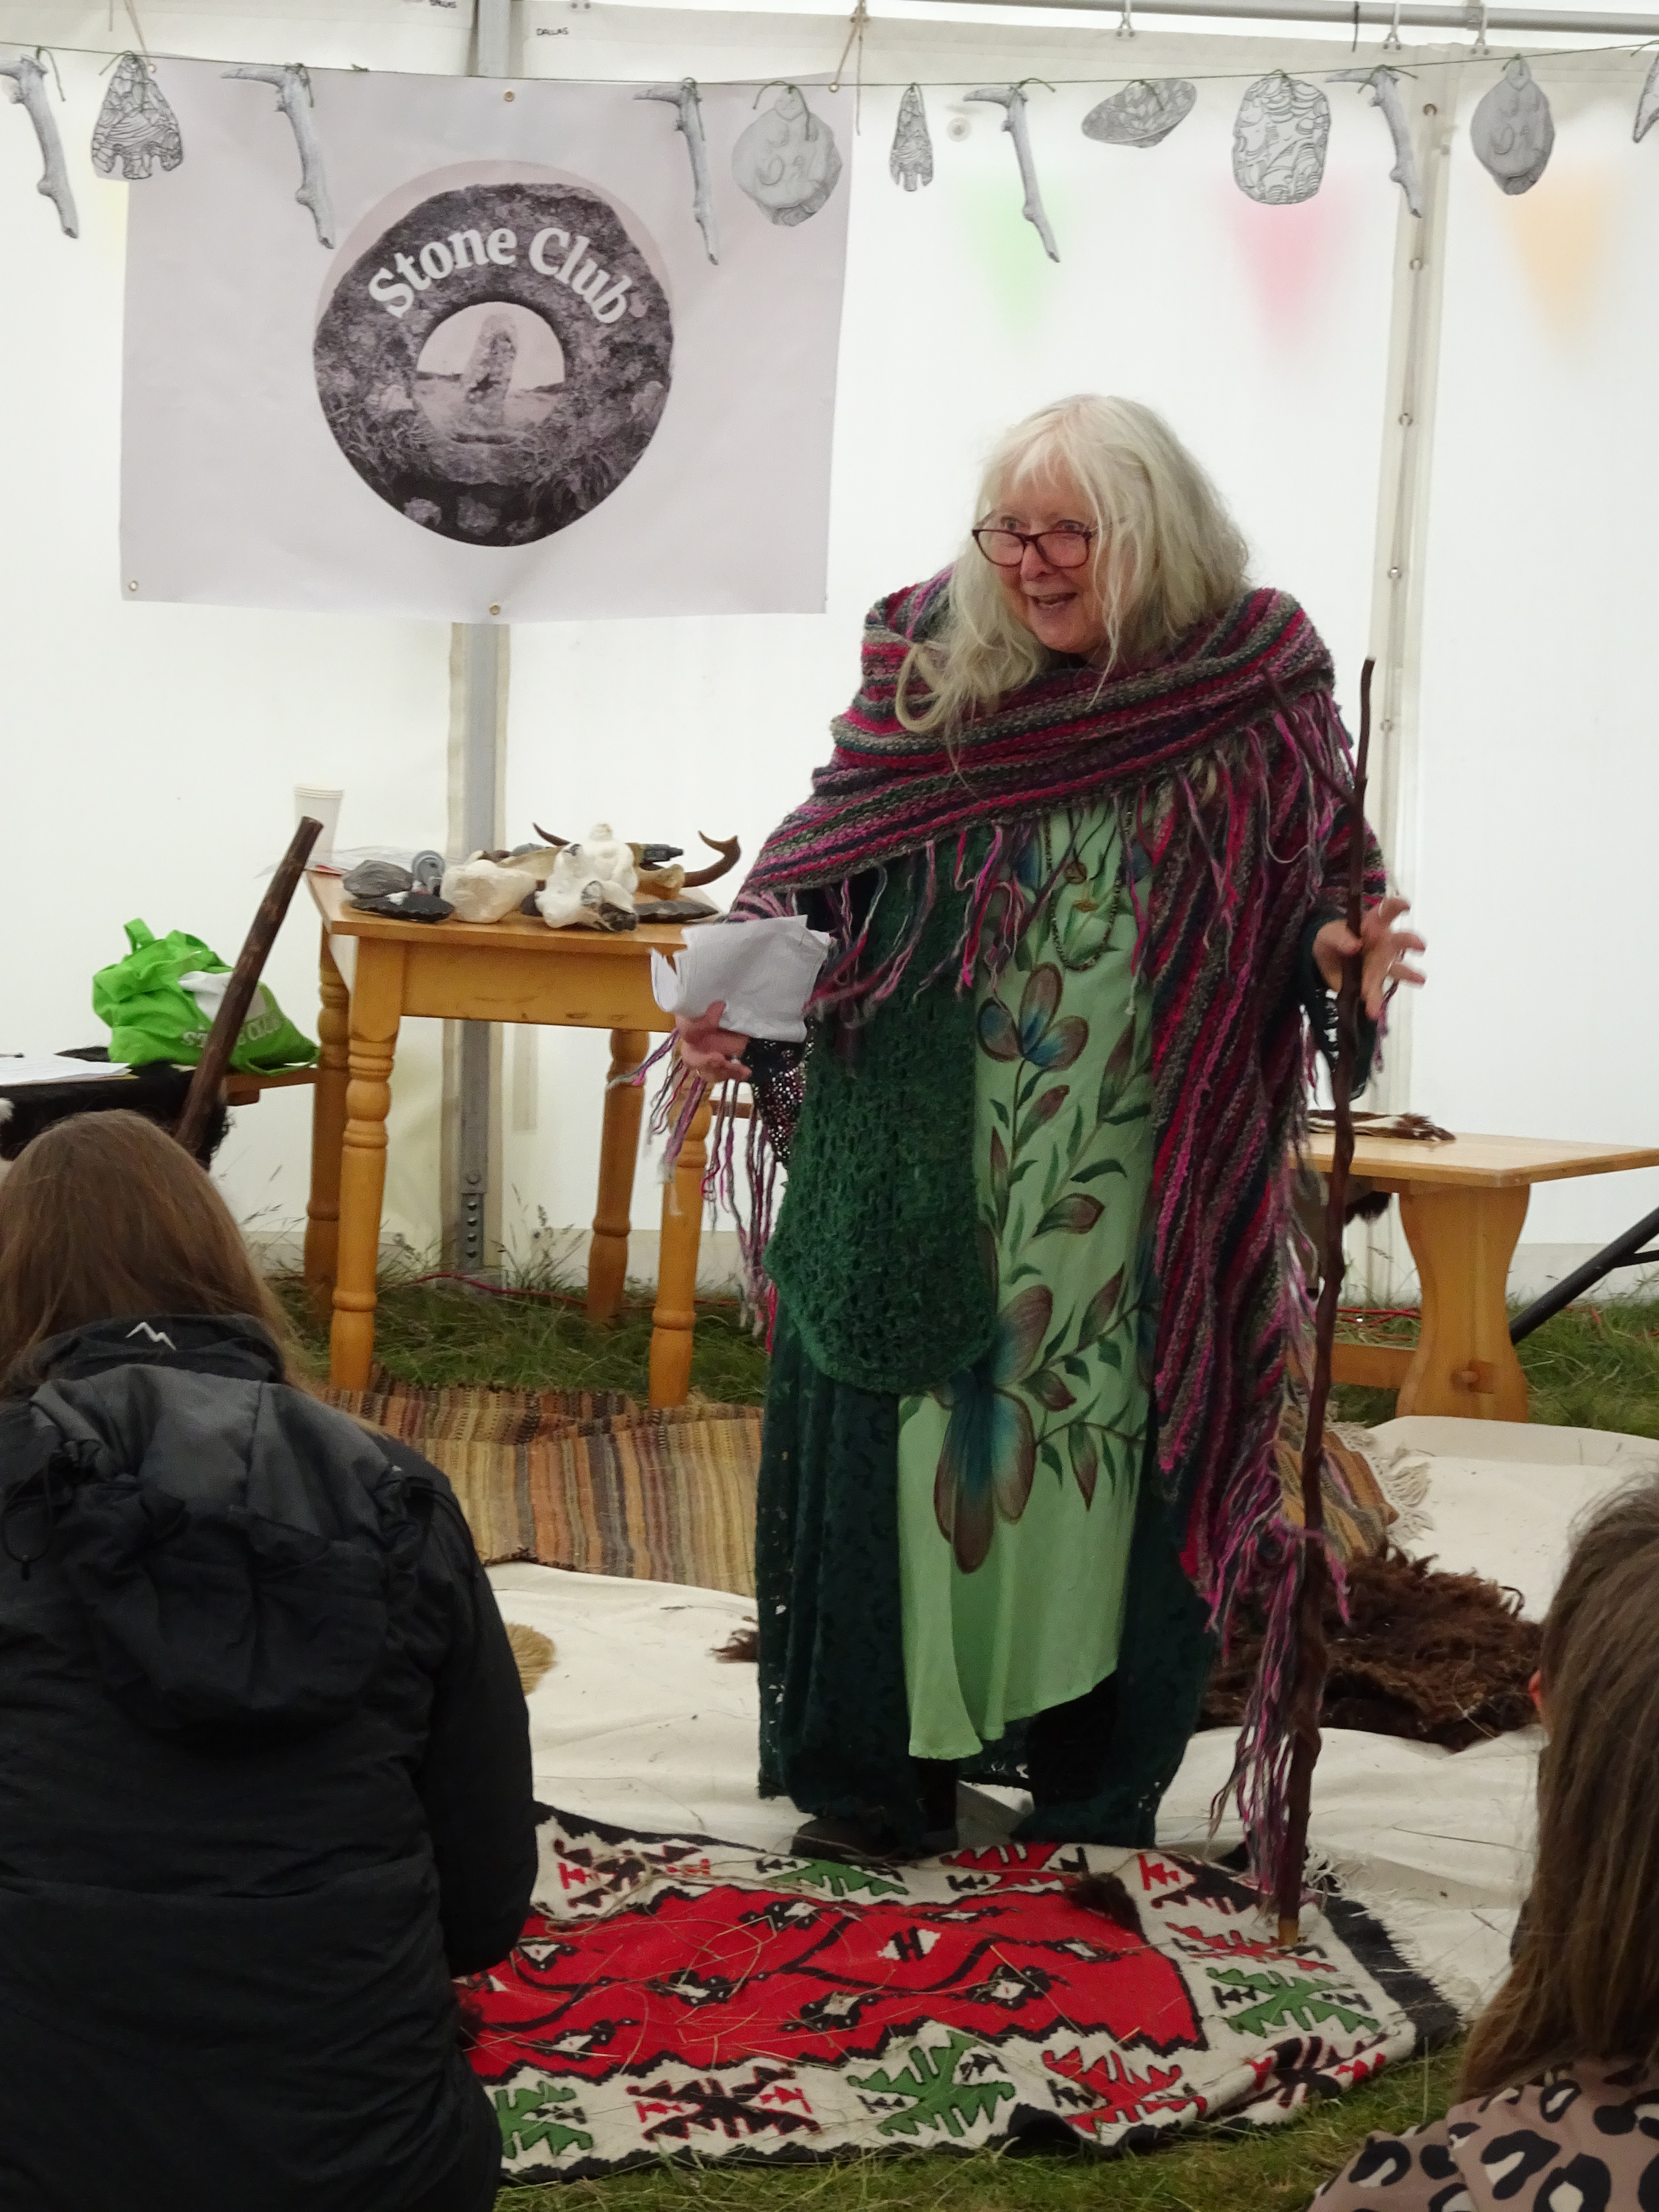 Val Thomas speaking at the Grimes Graves Flint Festival, 'Beneath the Surface', on 15th June 2024, standing with her forked stick in front of the audience in the talks tent, with the 'Stone Club' banner and a table of replica neolthic artefacts behind her.